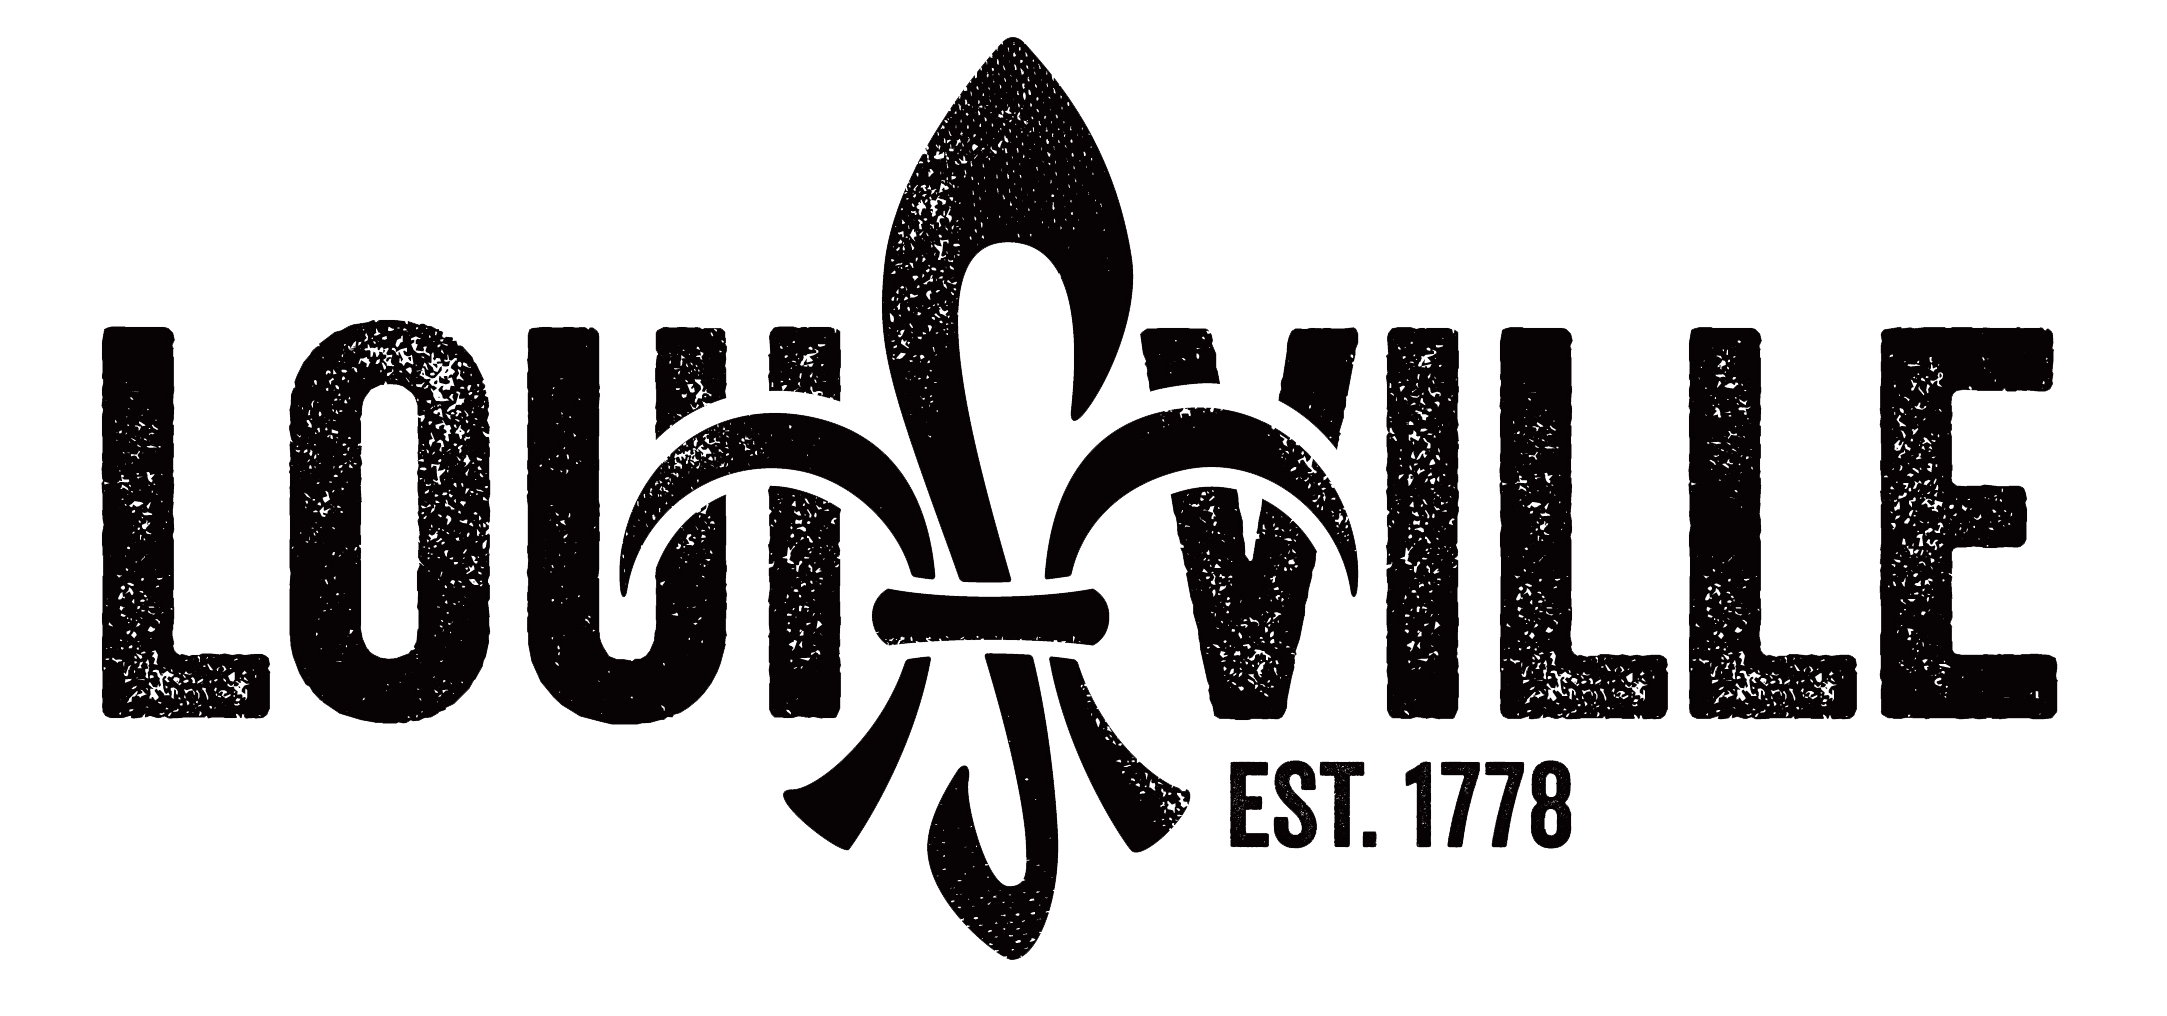 City of Louisville Logo - Directions